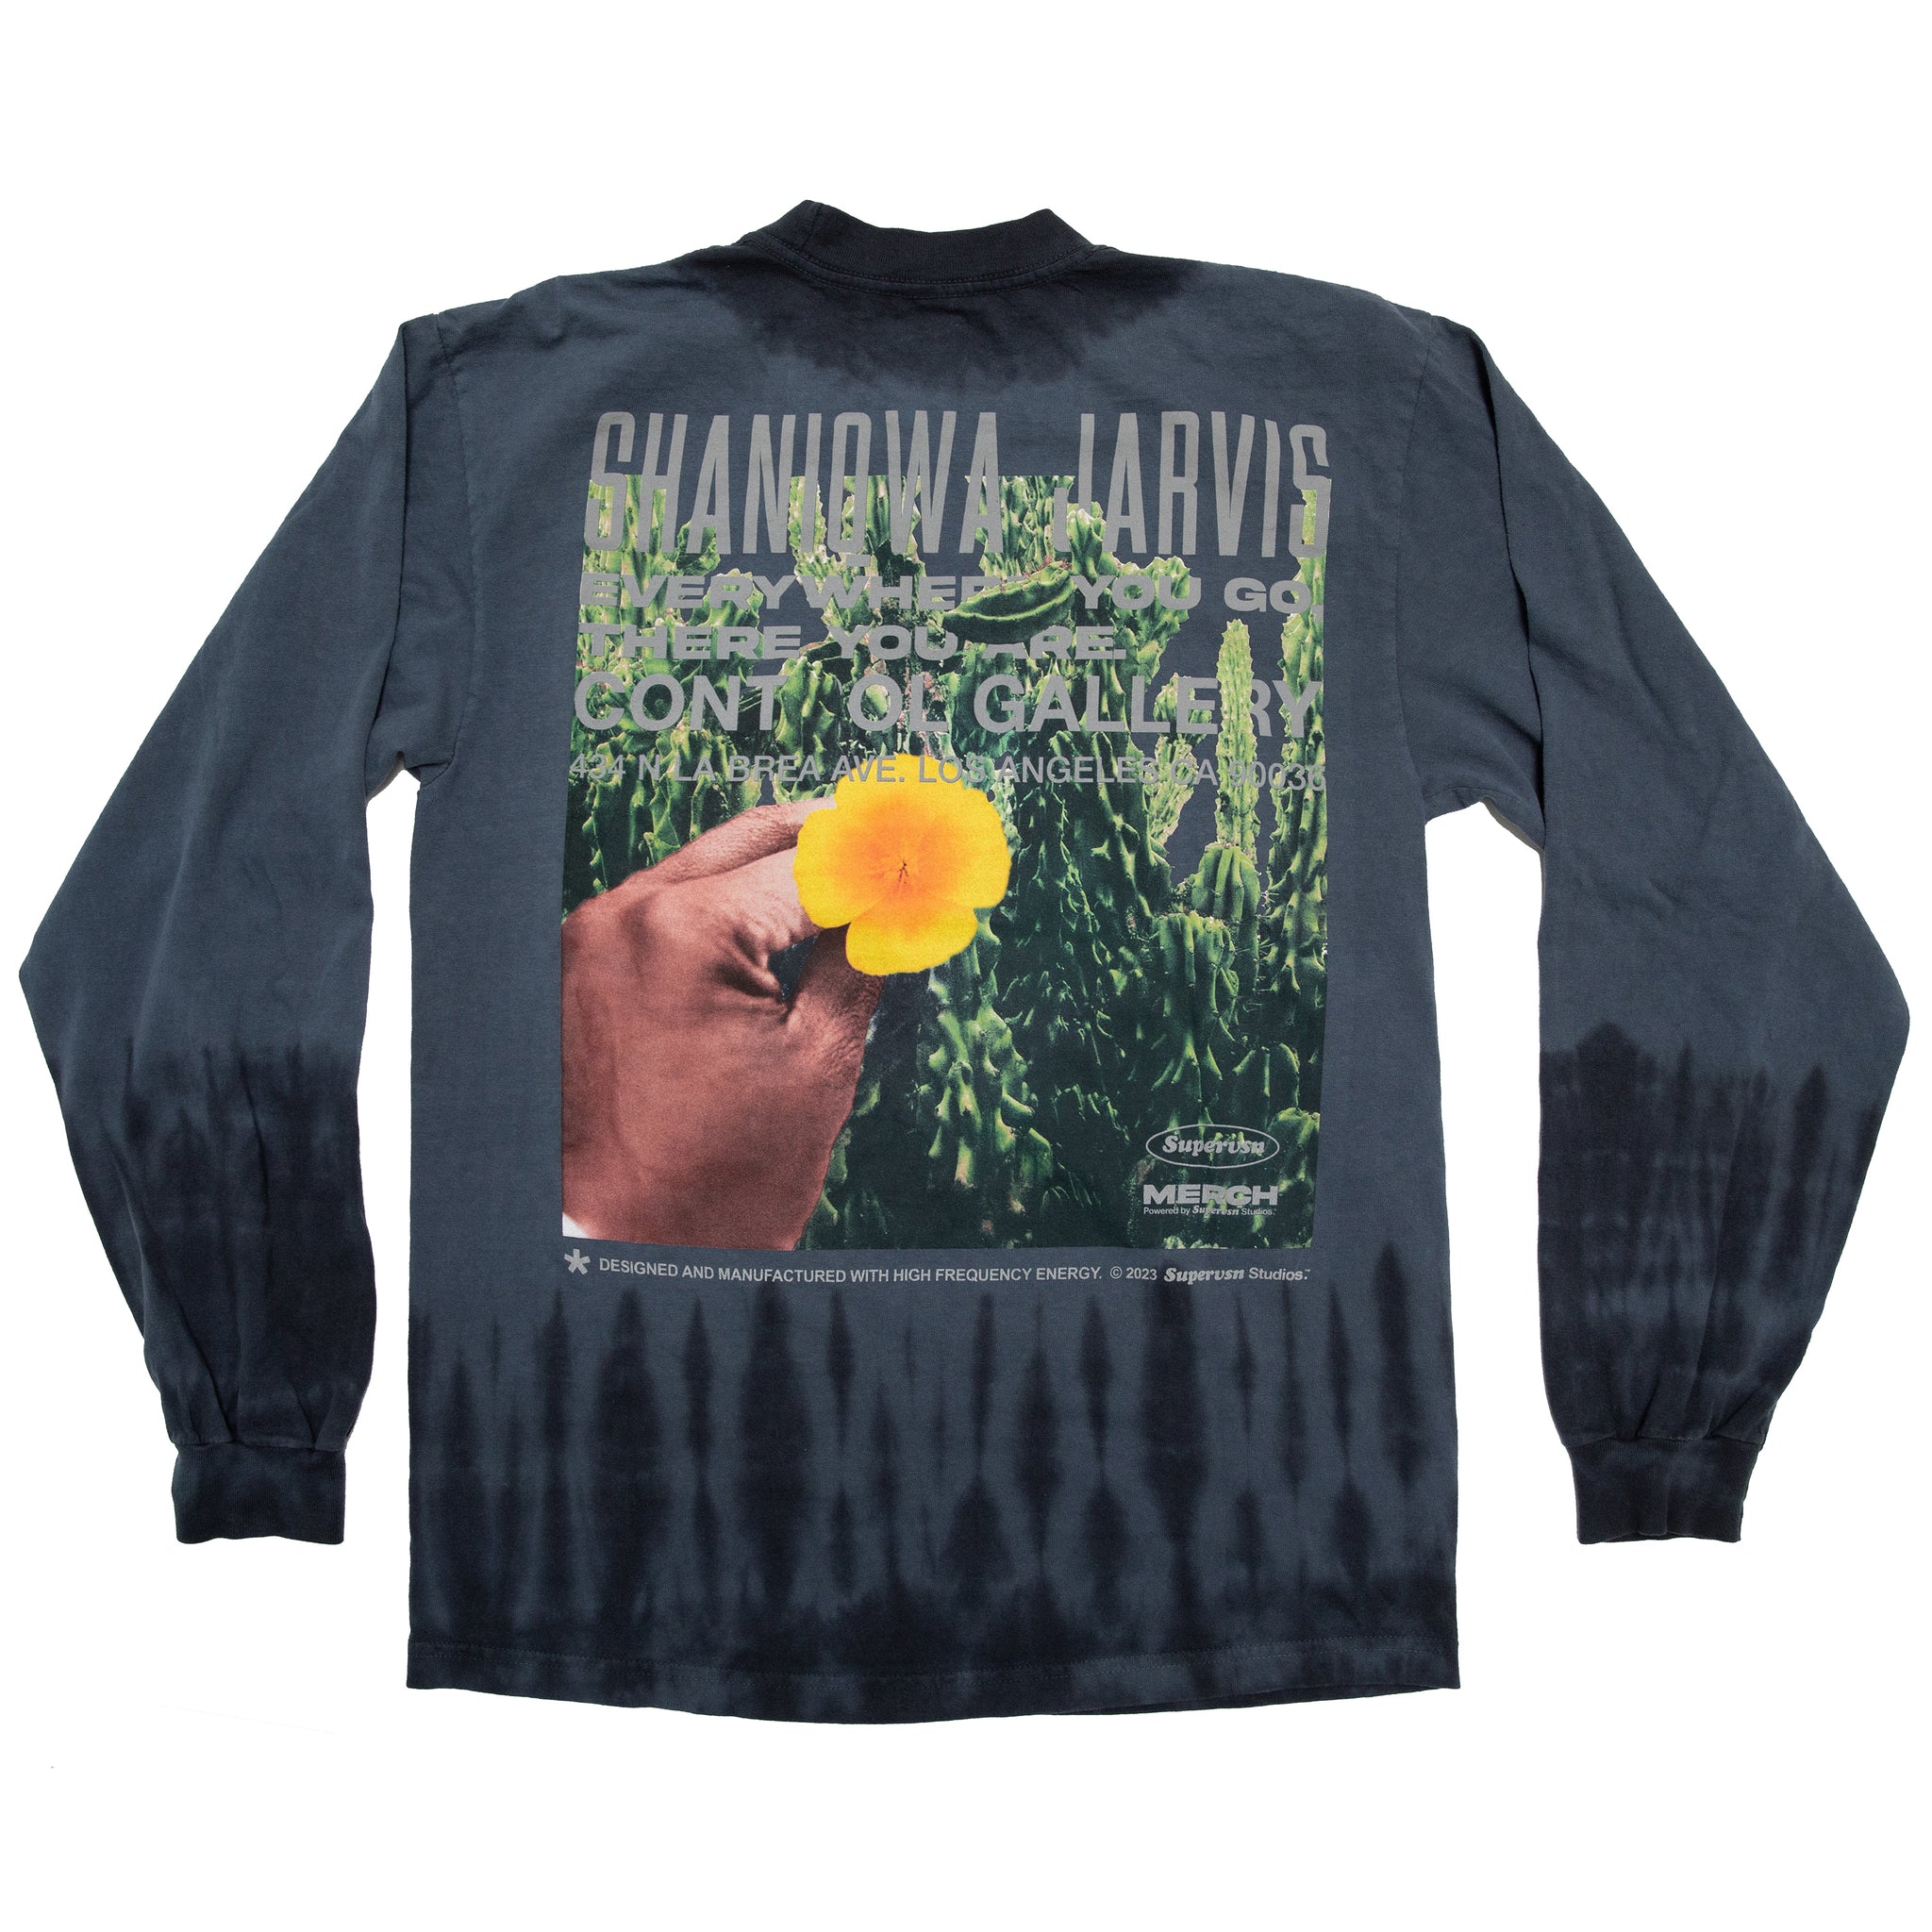 Shaniqwa Jarvis x SUPERVSN "EVERYWHERE YOU GO, THERE YOU ARE" Long Sleeve Tee